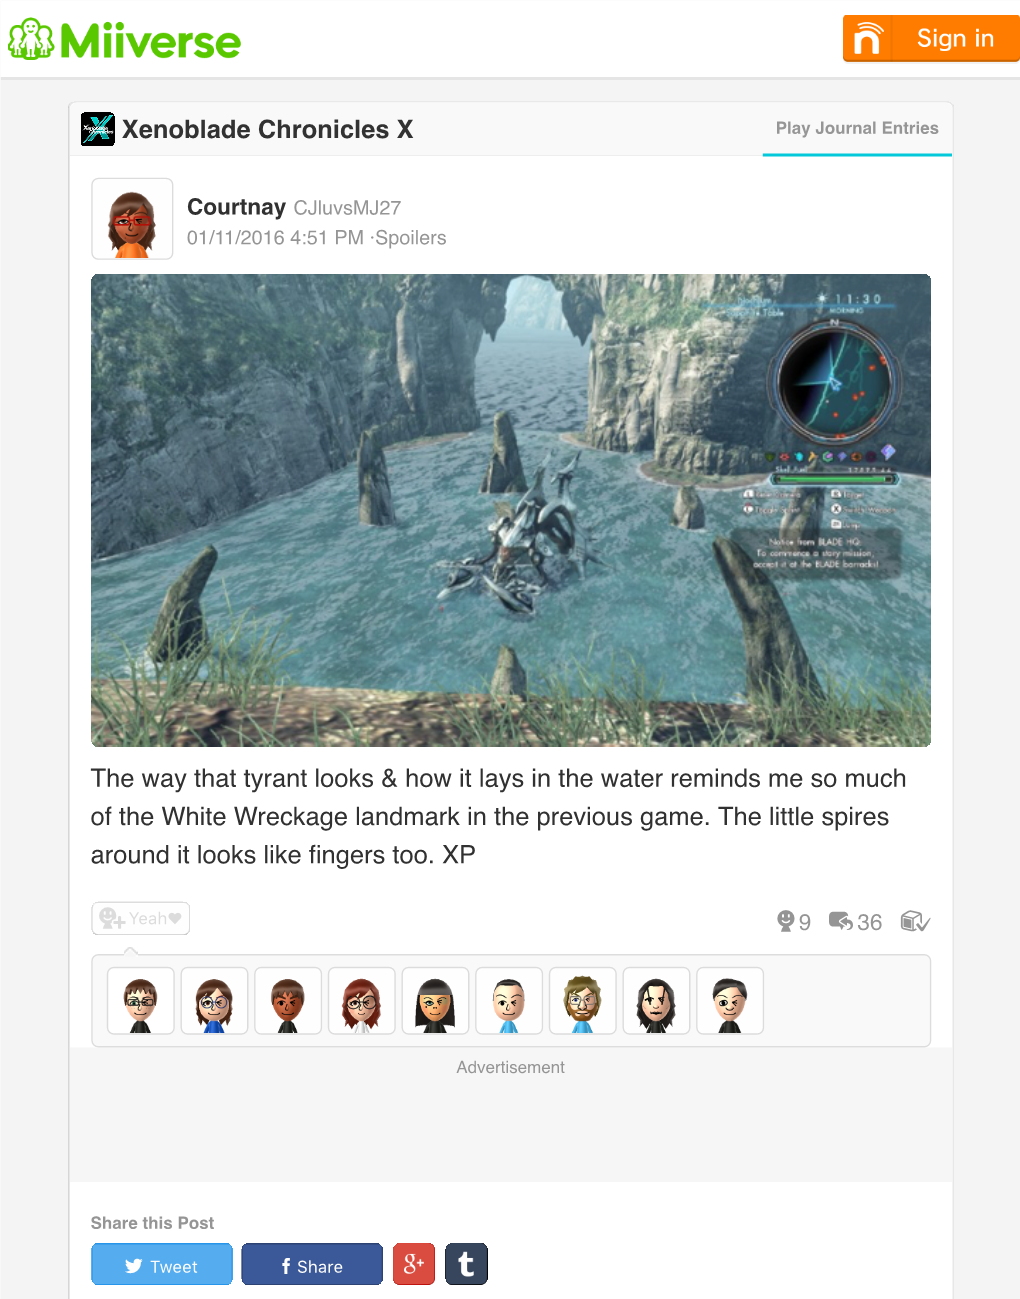 Xenoblade Chronicles X the Way That Tyrant Looks & How It Lays in The